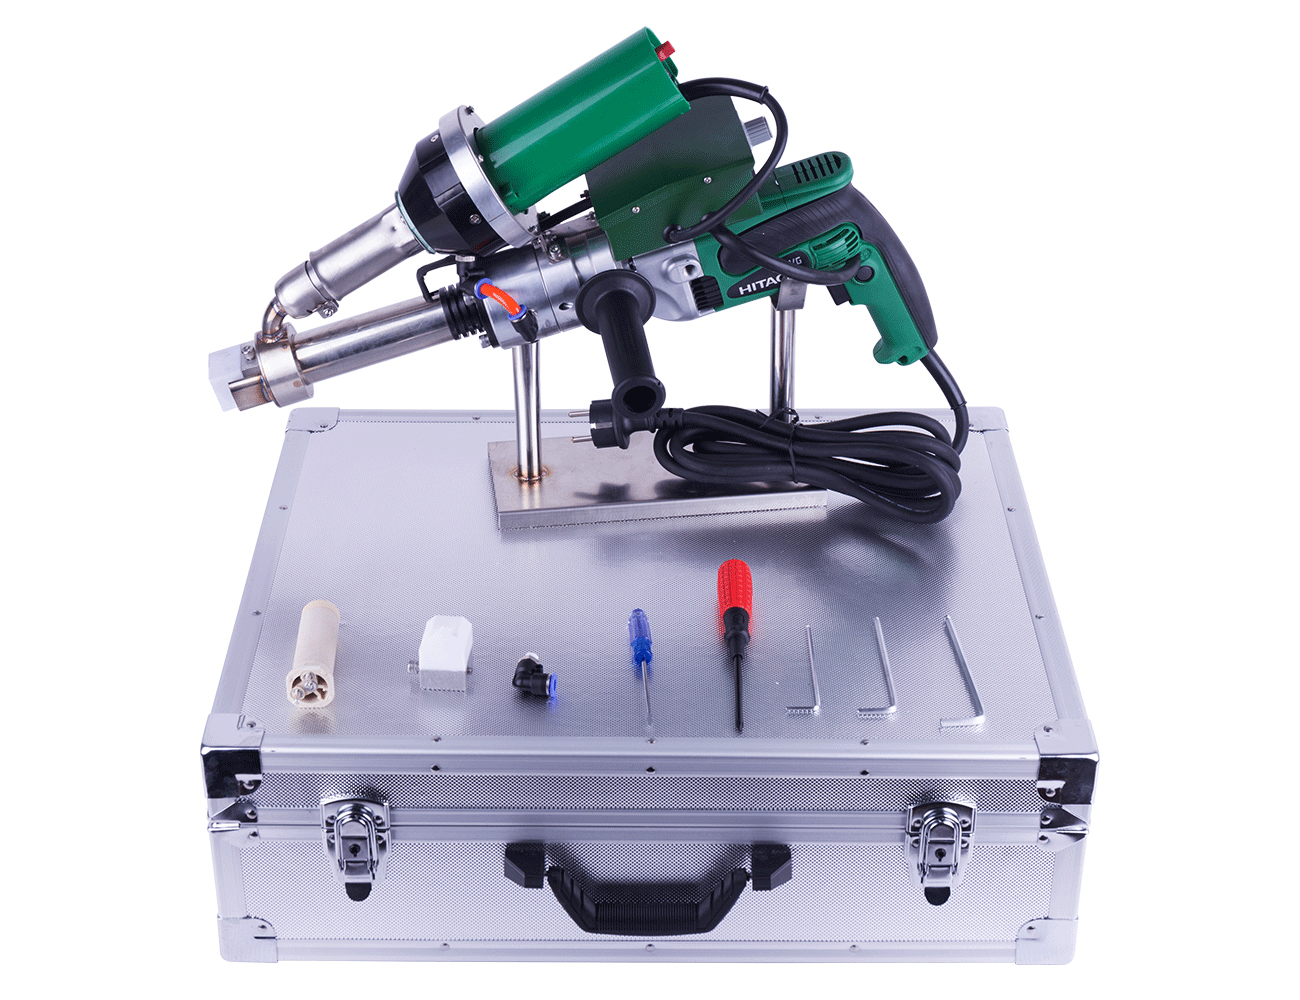 SWT-NS600 1600W Automation Hand Held Plastic Extrusion Welding Gun for Plastic Welding PP PE PVC